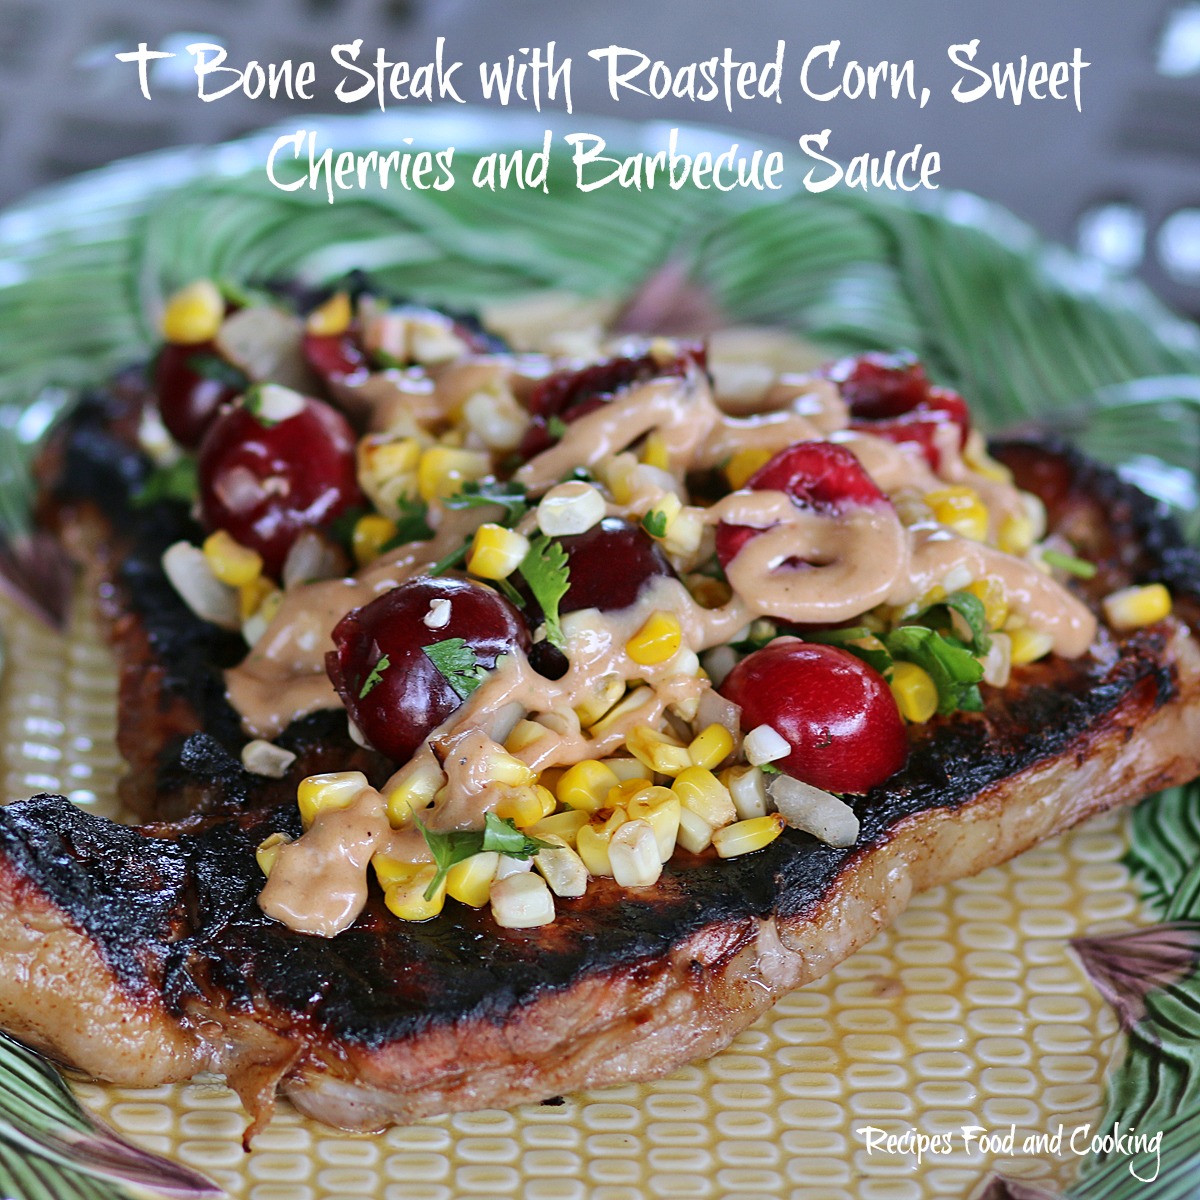 T Bone Steak with Roasted Corn, Sweet Cherries and Barbecue Sauce